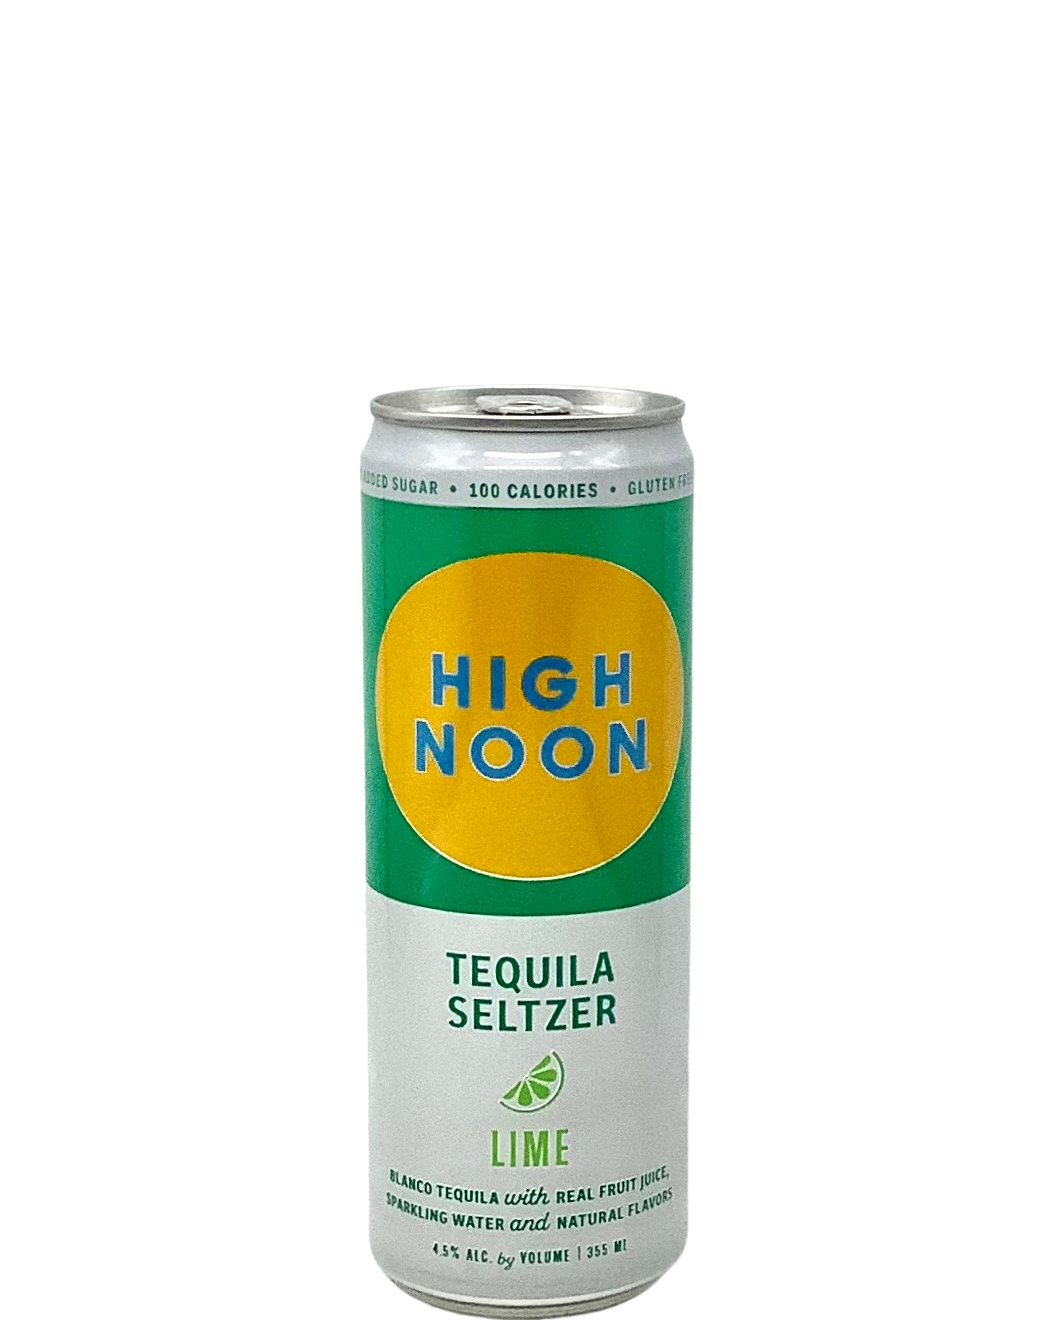 High Noon, Tequila Seltzer Lime 355ml Can newarrival